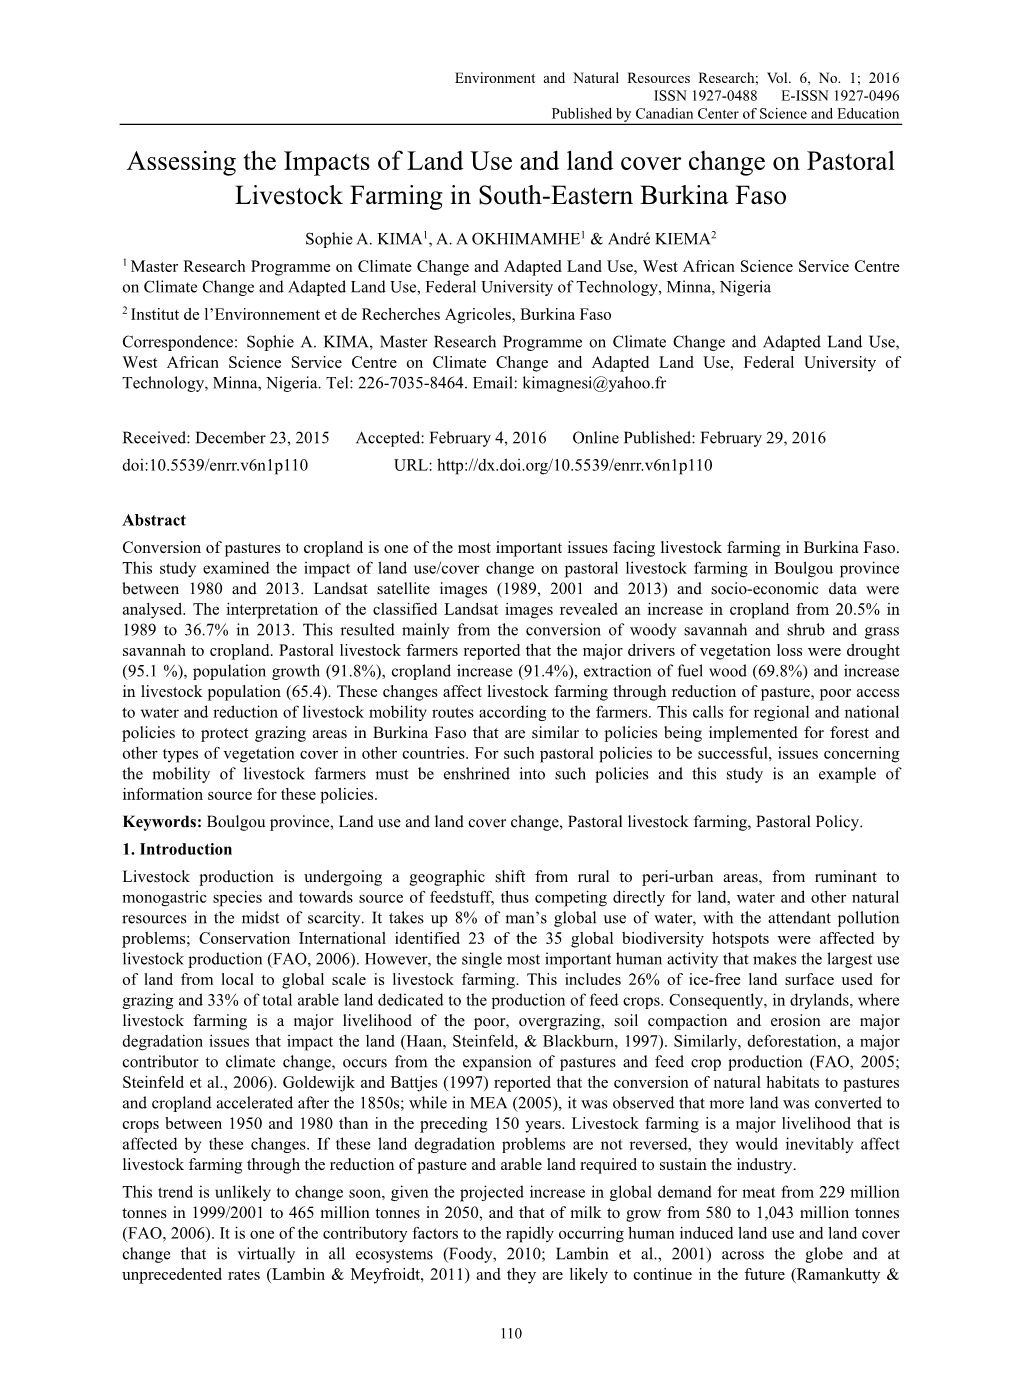 Assessing the Impacts of Land Use and Land Cover Change on Pastoral Livestock Farming in South-Eastern Burkina Faso